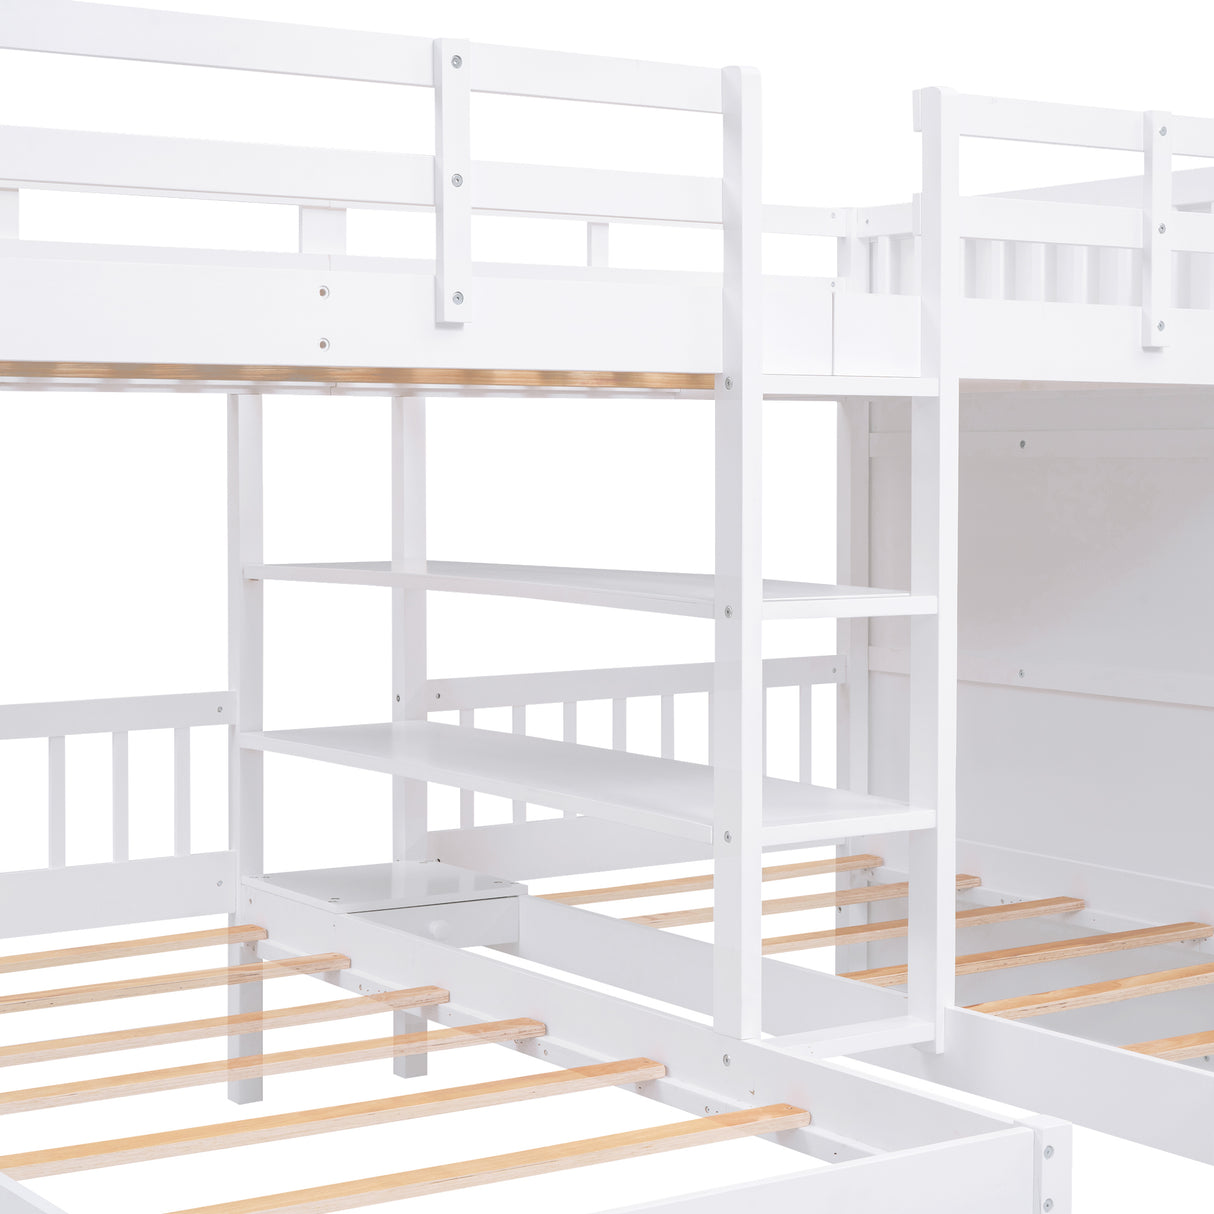 Full-Over-Twin-Twin Bunk Bed with Shelves, Wardrobe and Mirror, White - Home Elegance USA